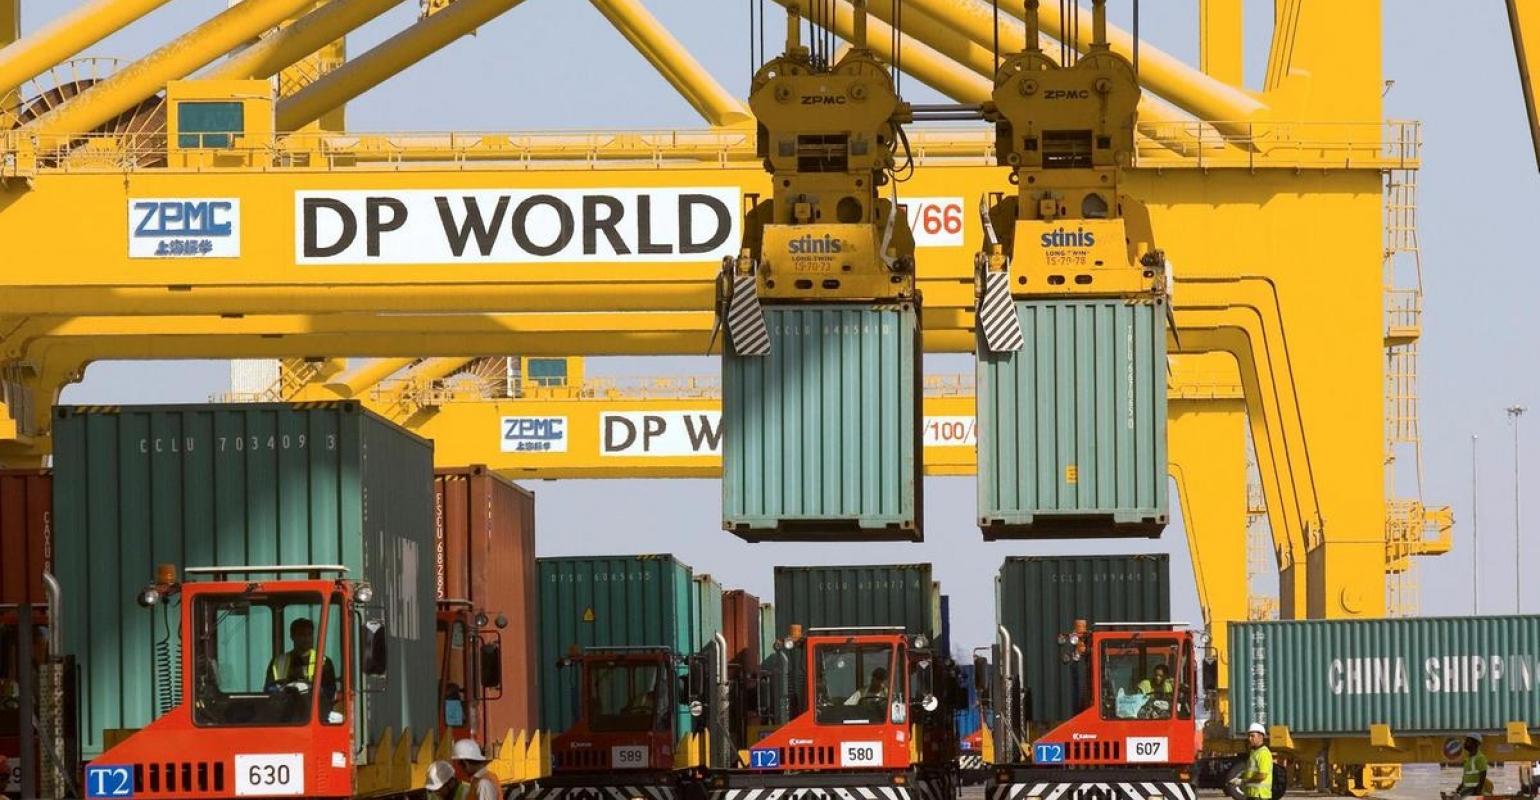 DP World’s global container throughput increased by a record 10.2% in Q1 2021